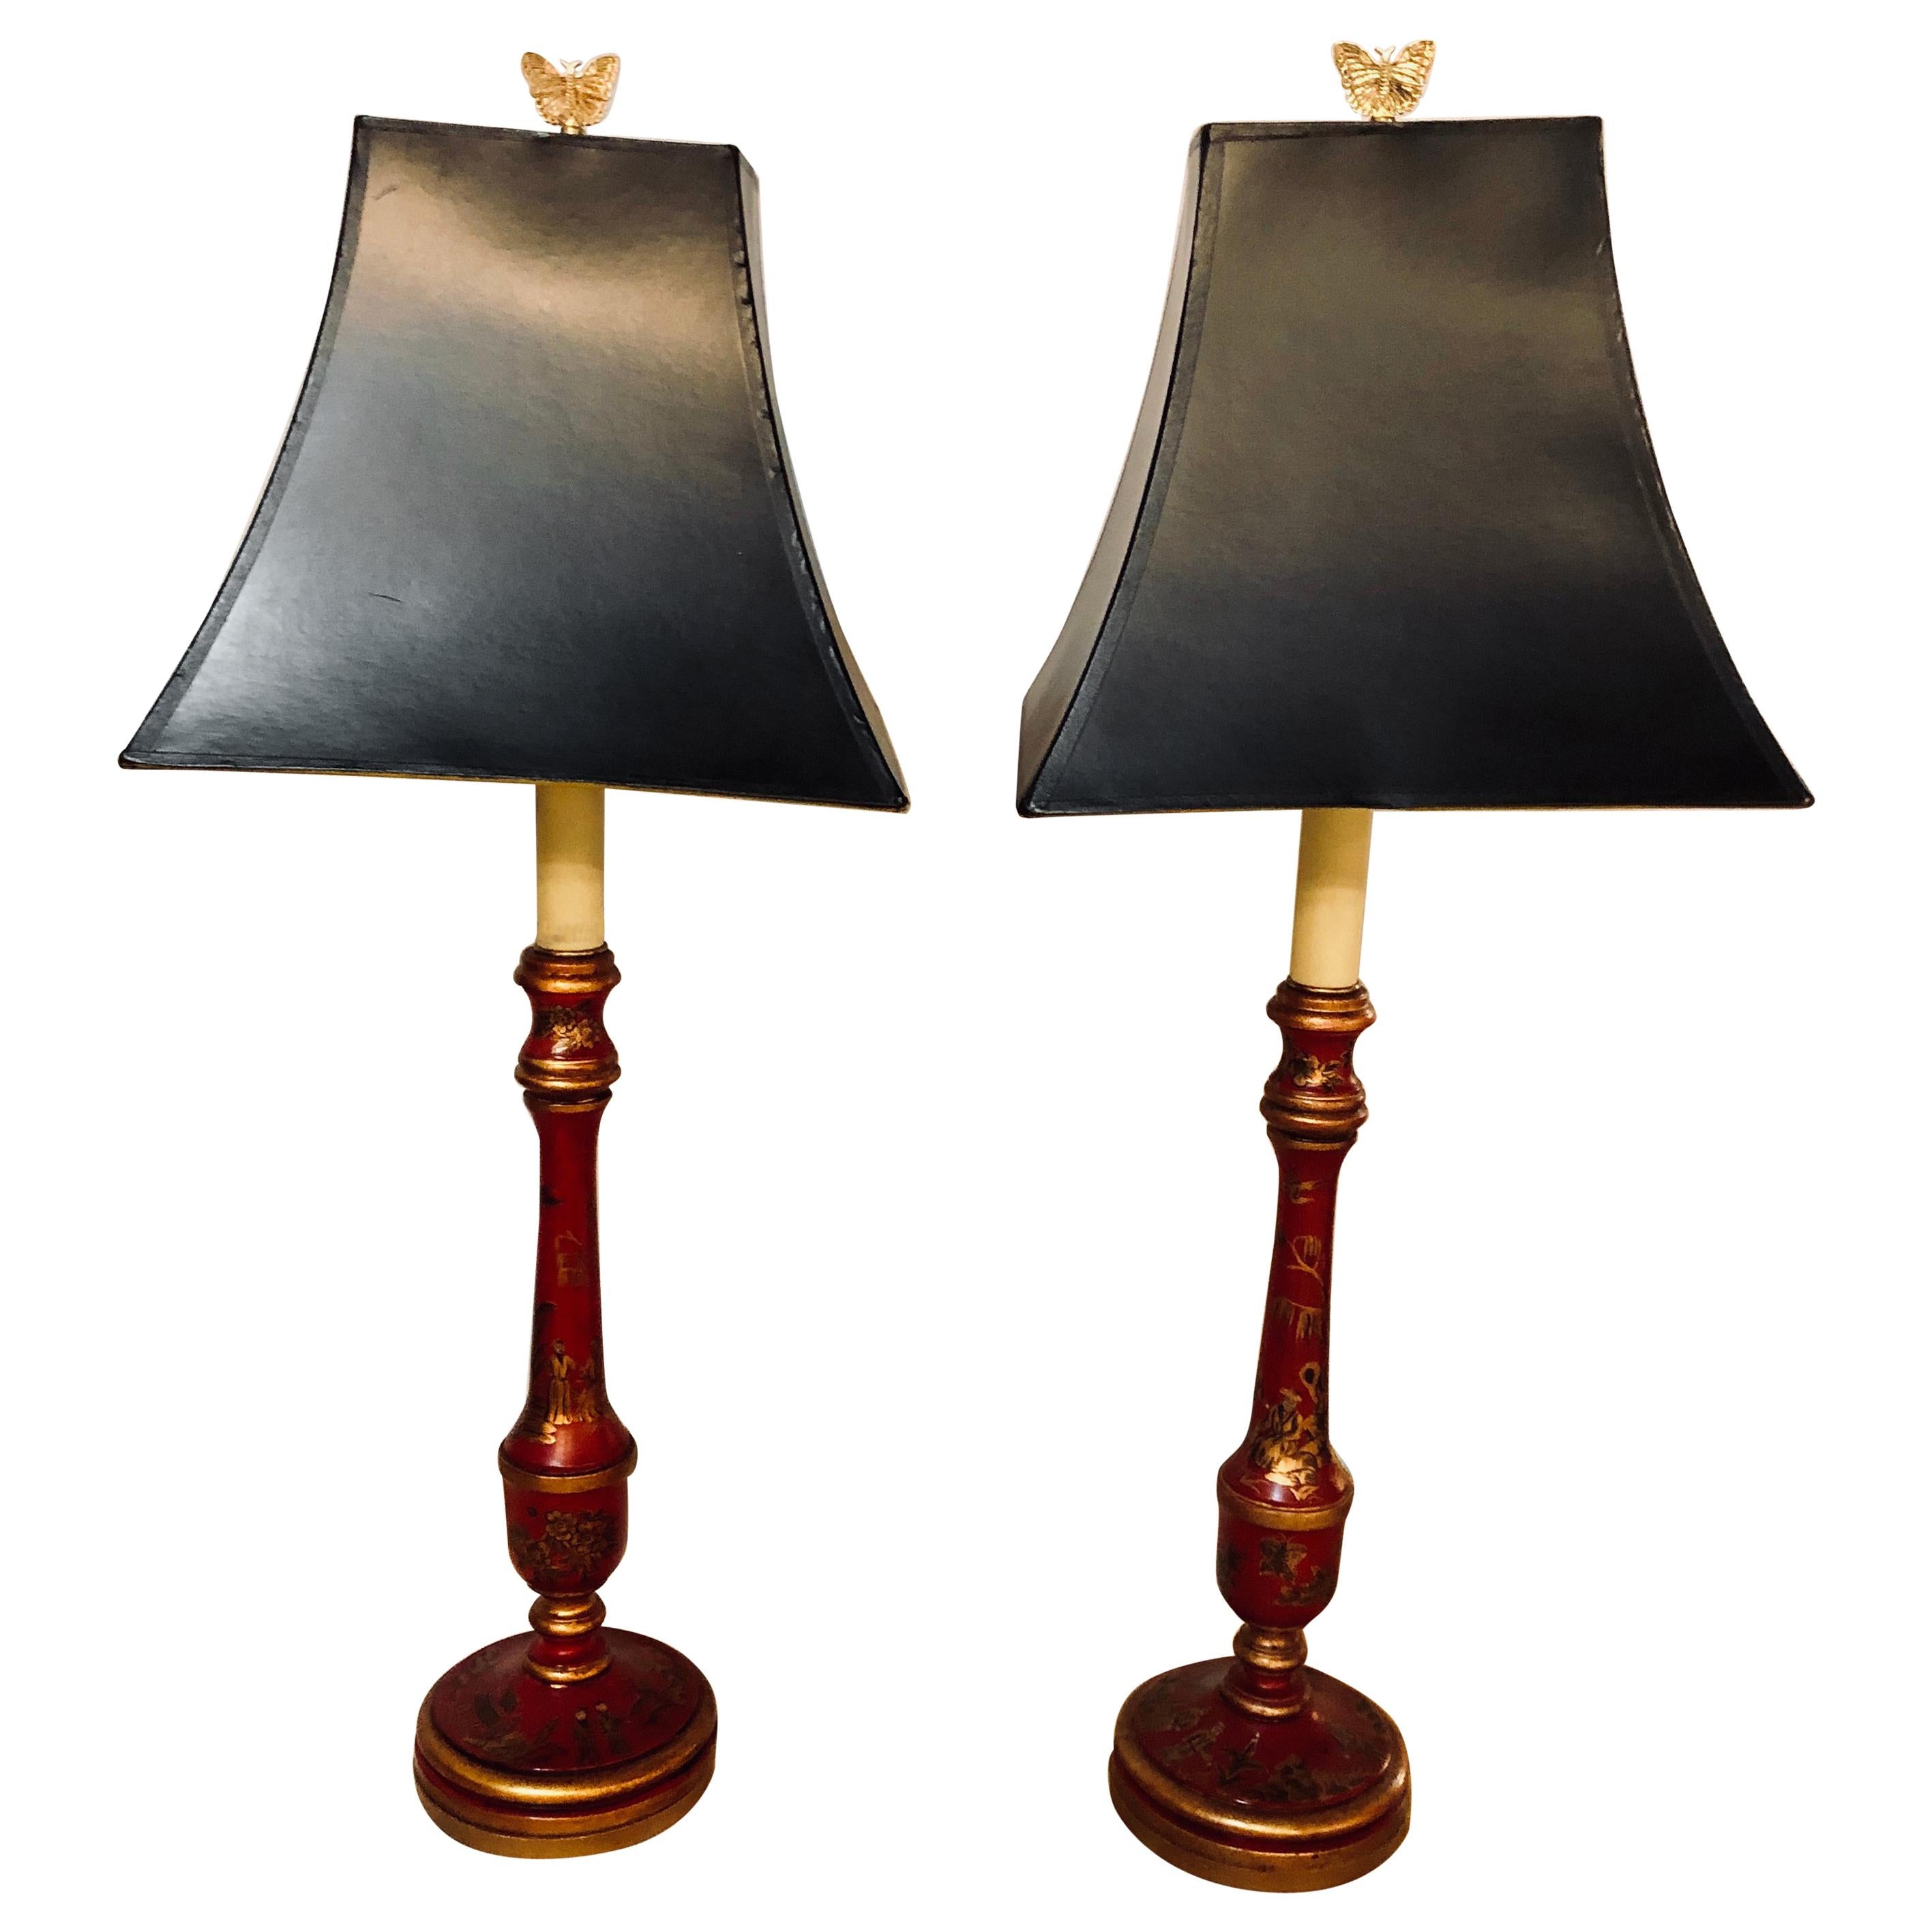 Chinroseiere Decorated Antique Candle-Prick Table Lamps with Custom Shades, Pair